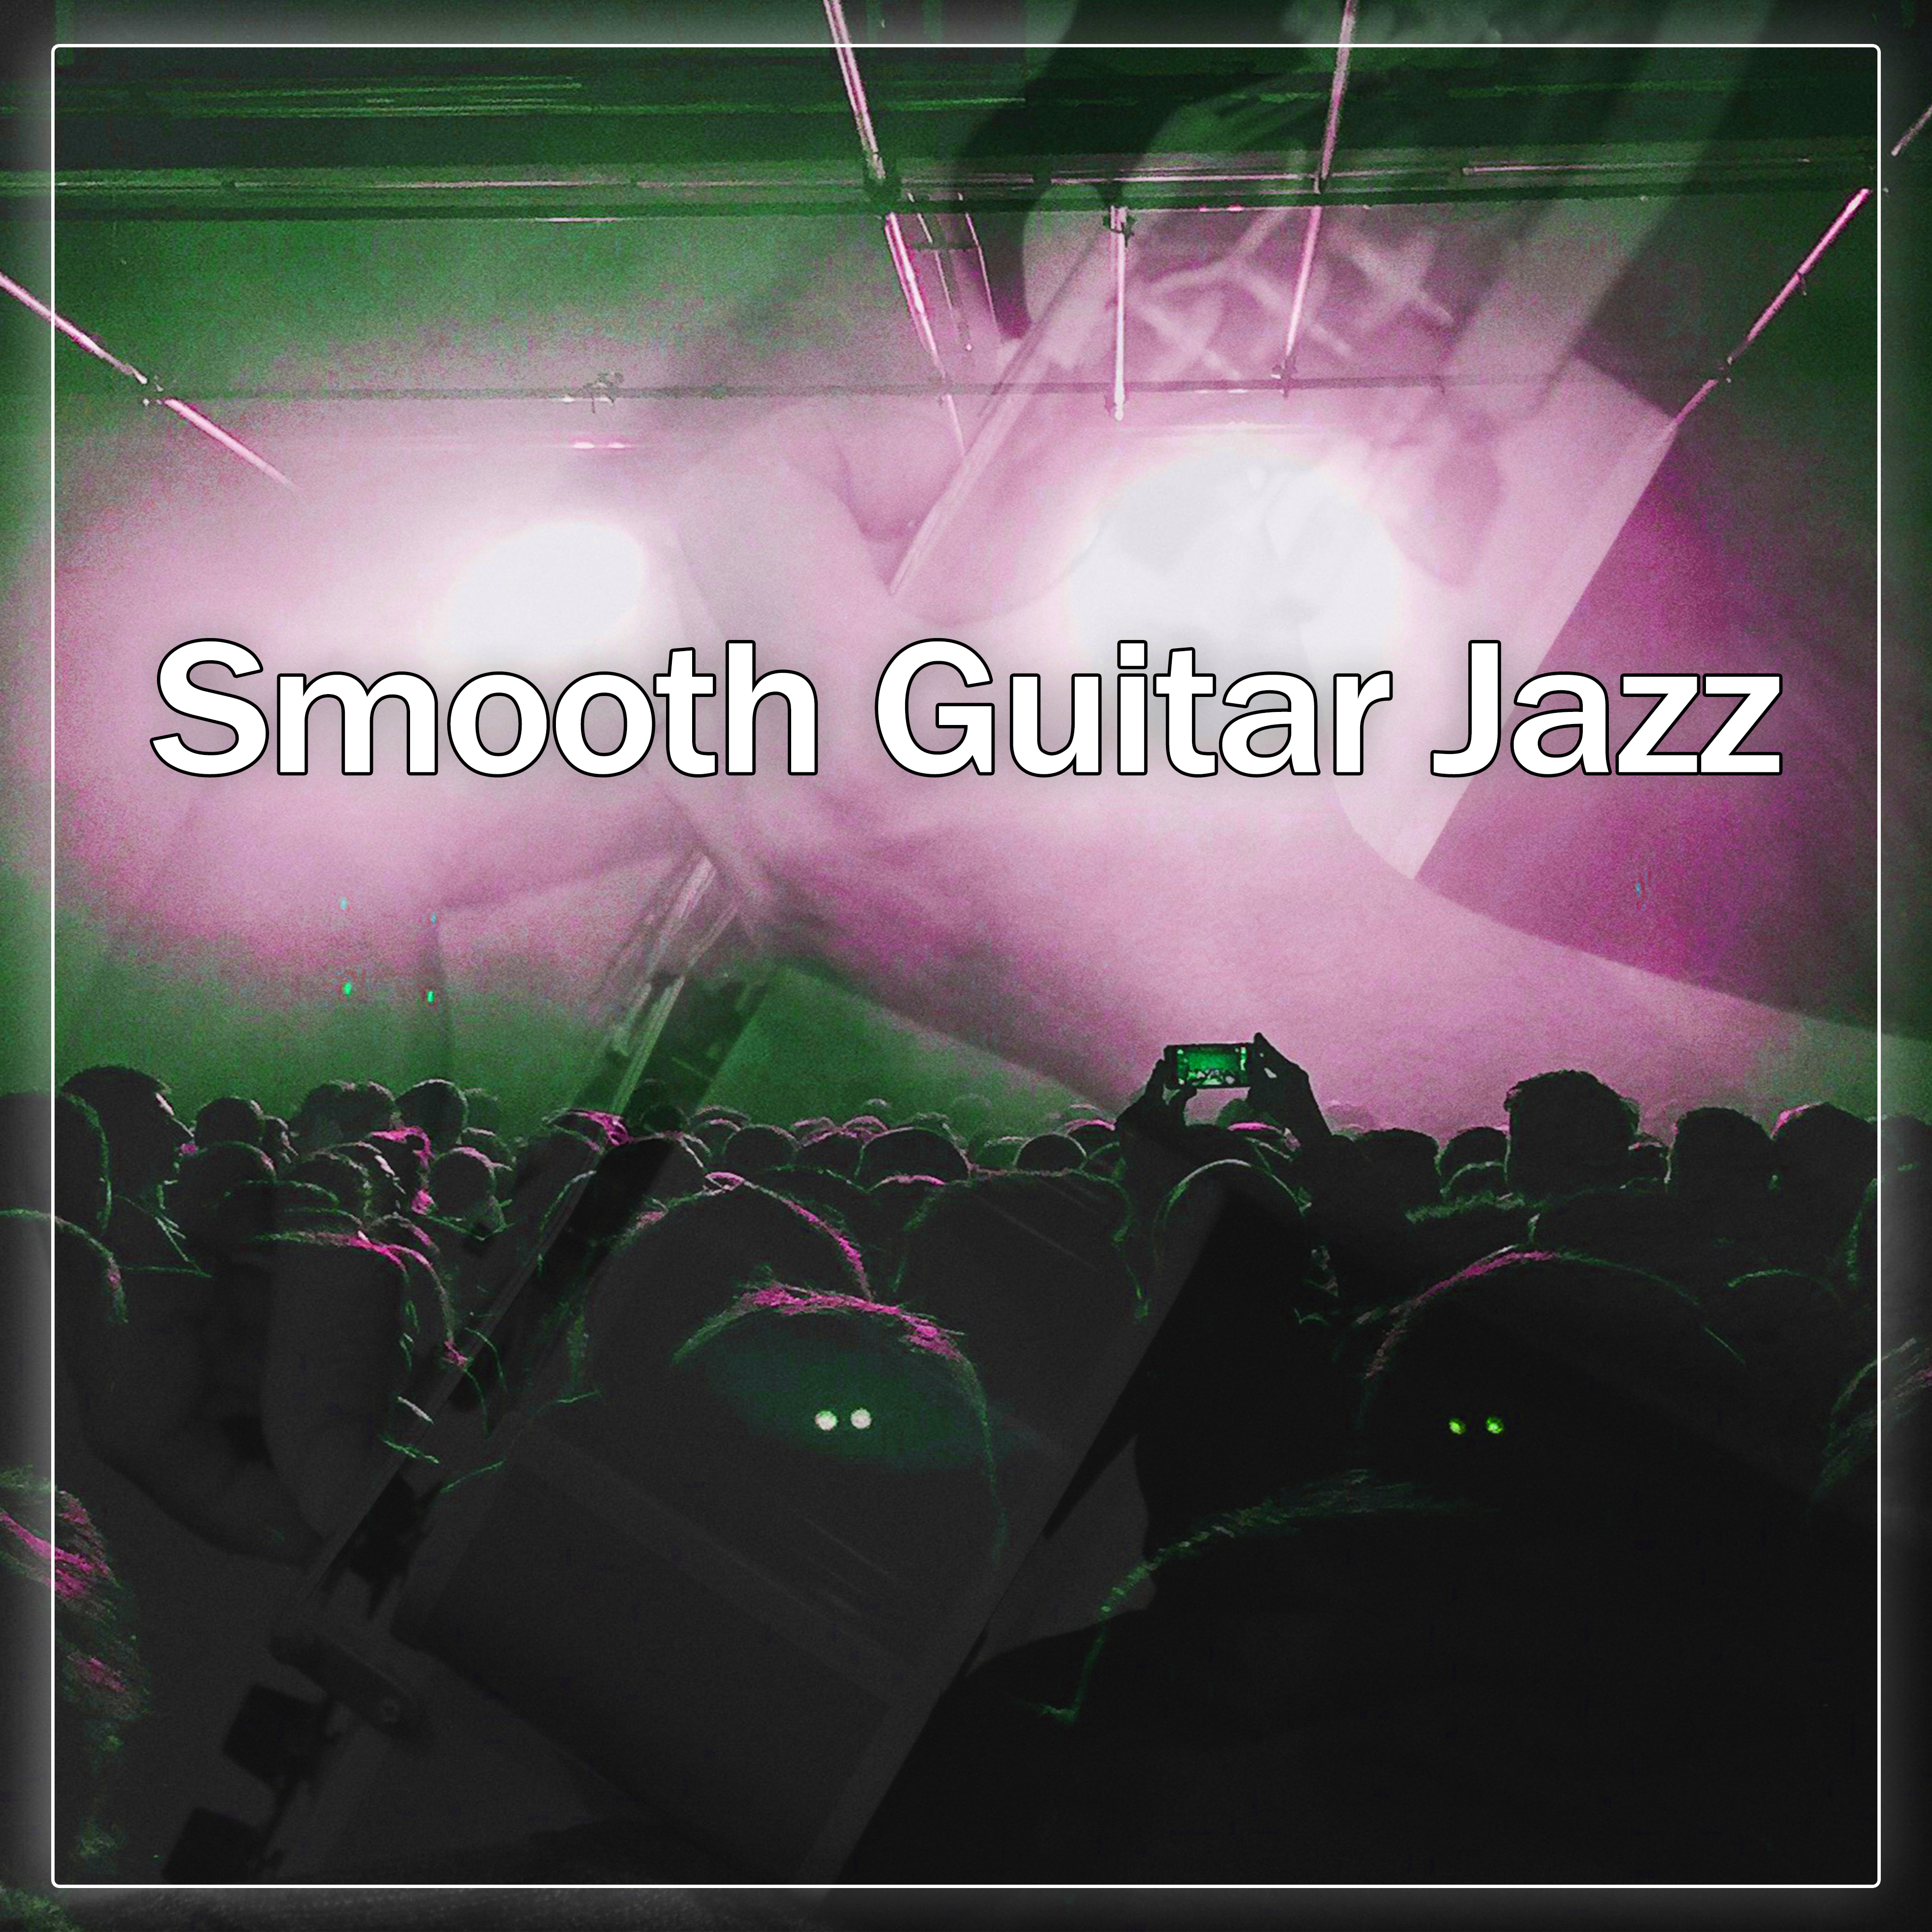 Smooth Guitar Jazz  Best Smooth Jazz, Guitar Fest, Chilled Piano, Restaurant, Cafe Background Sounds